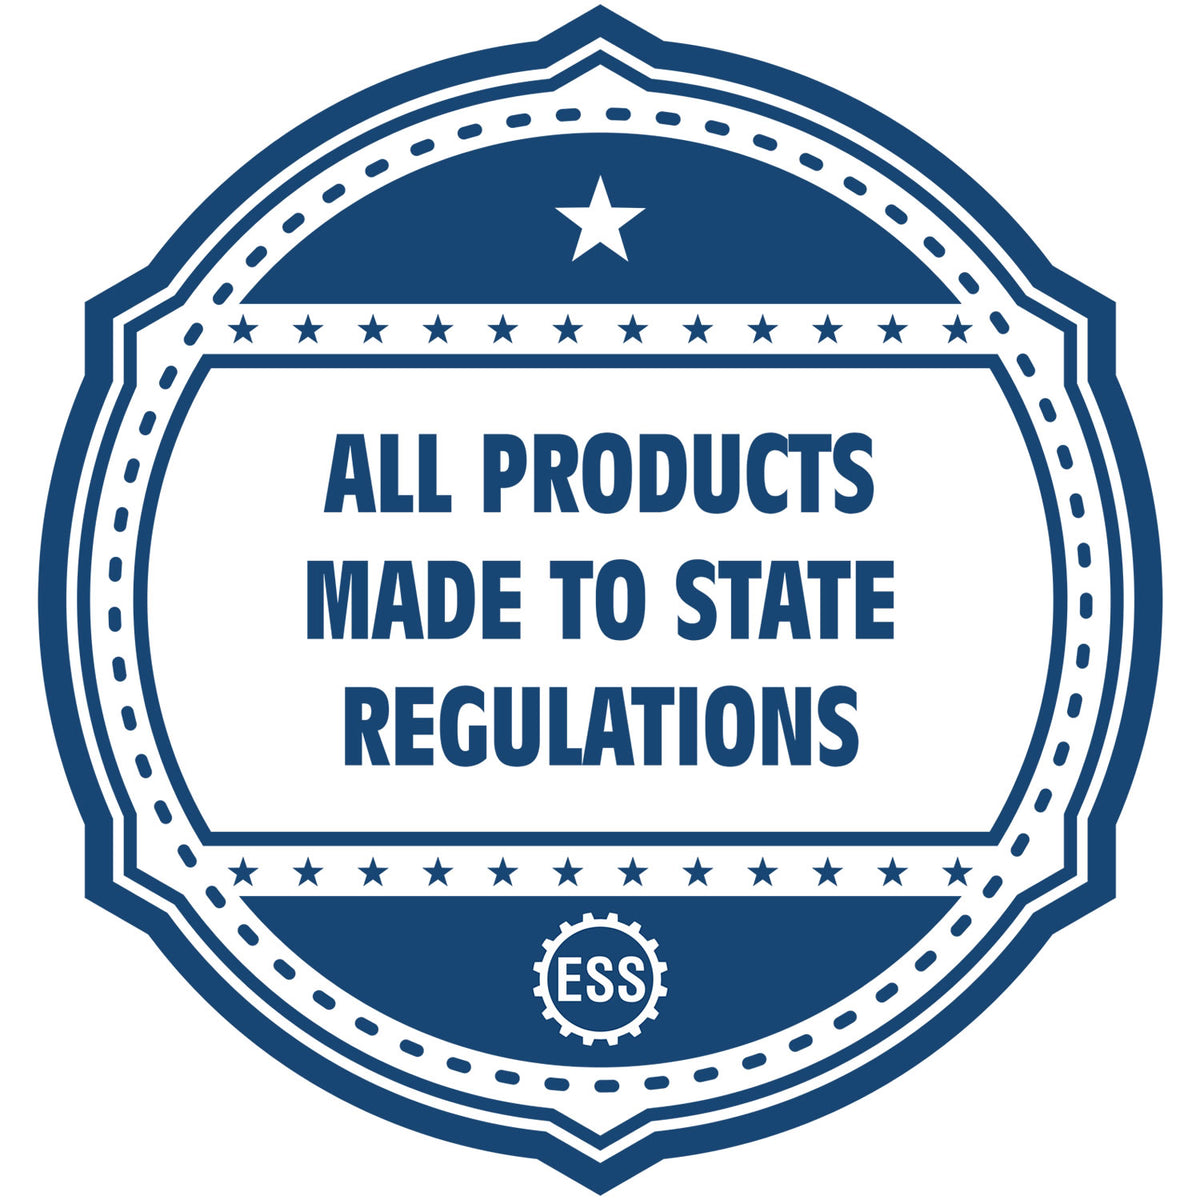 An icon or badge element for the Slim Pre-Inked West Virginia Professional Engineer Seal Stamp showing that this product is made in compliance with state regulations.